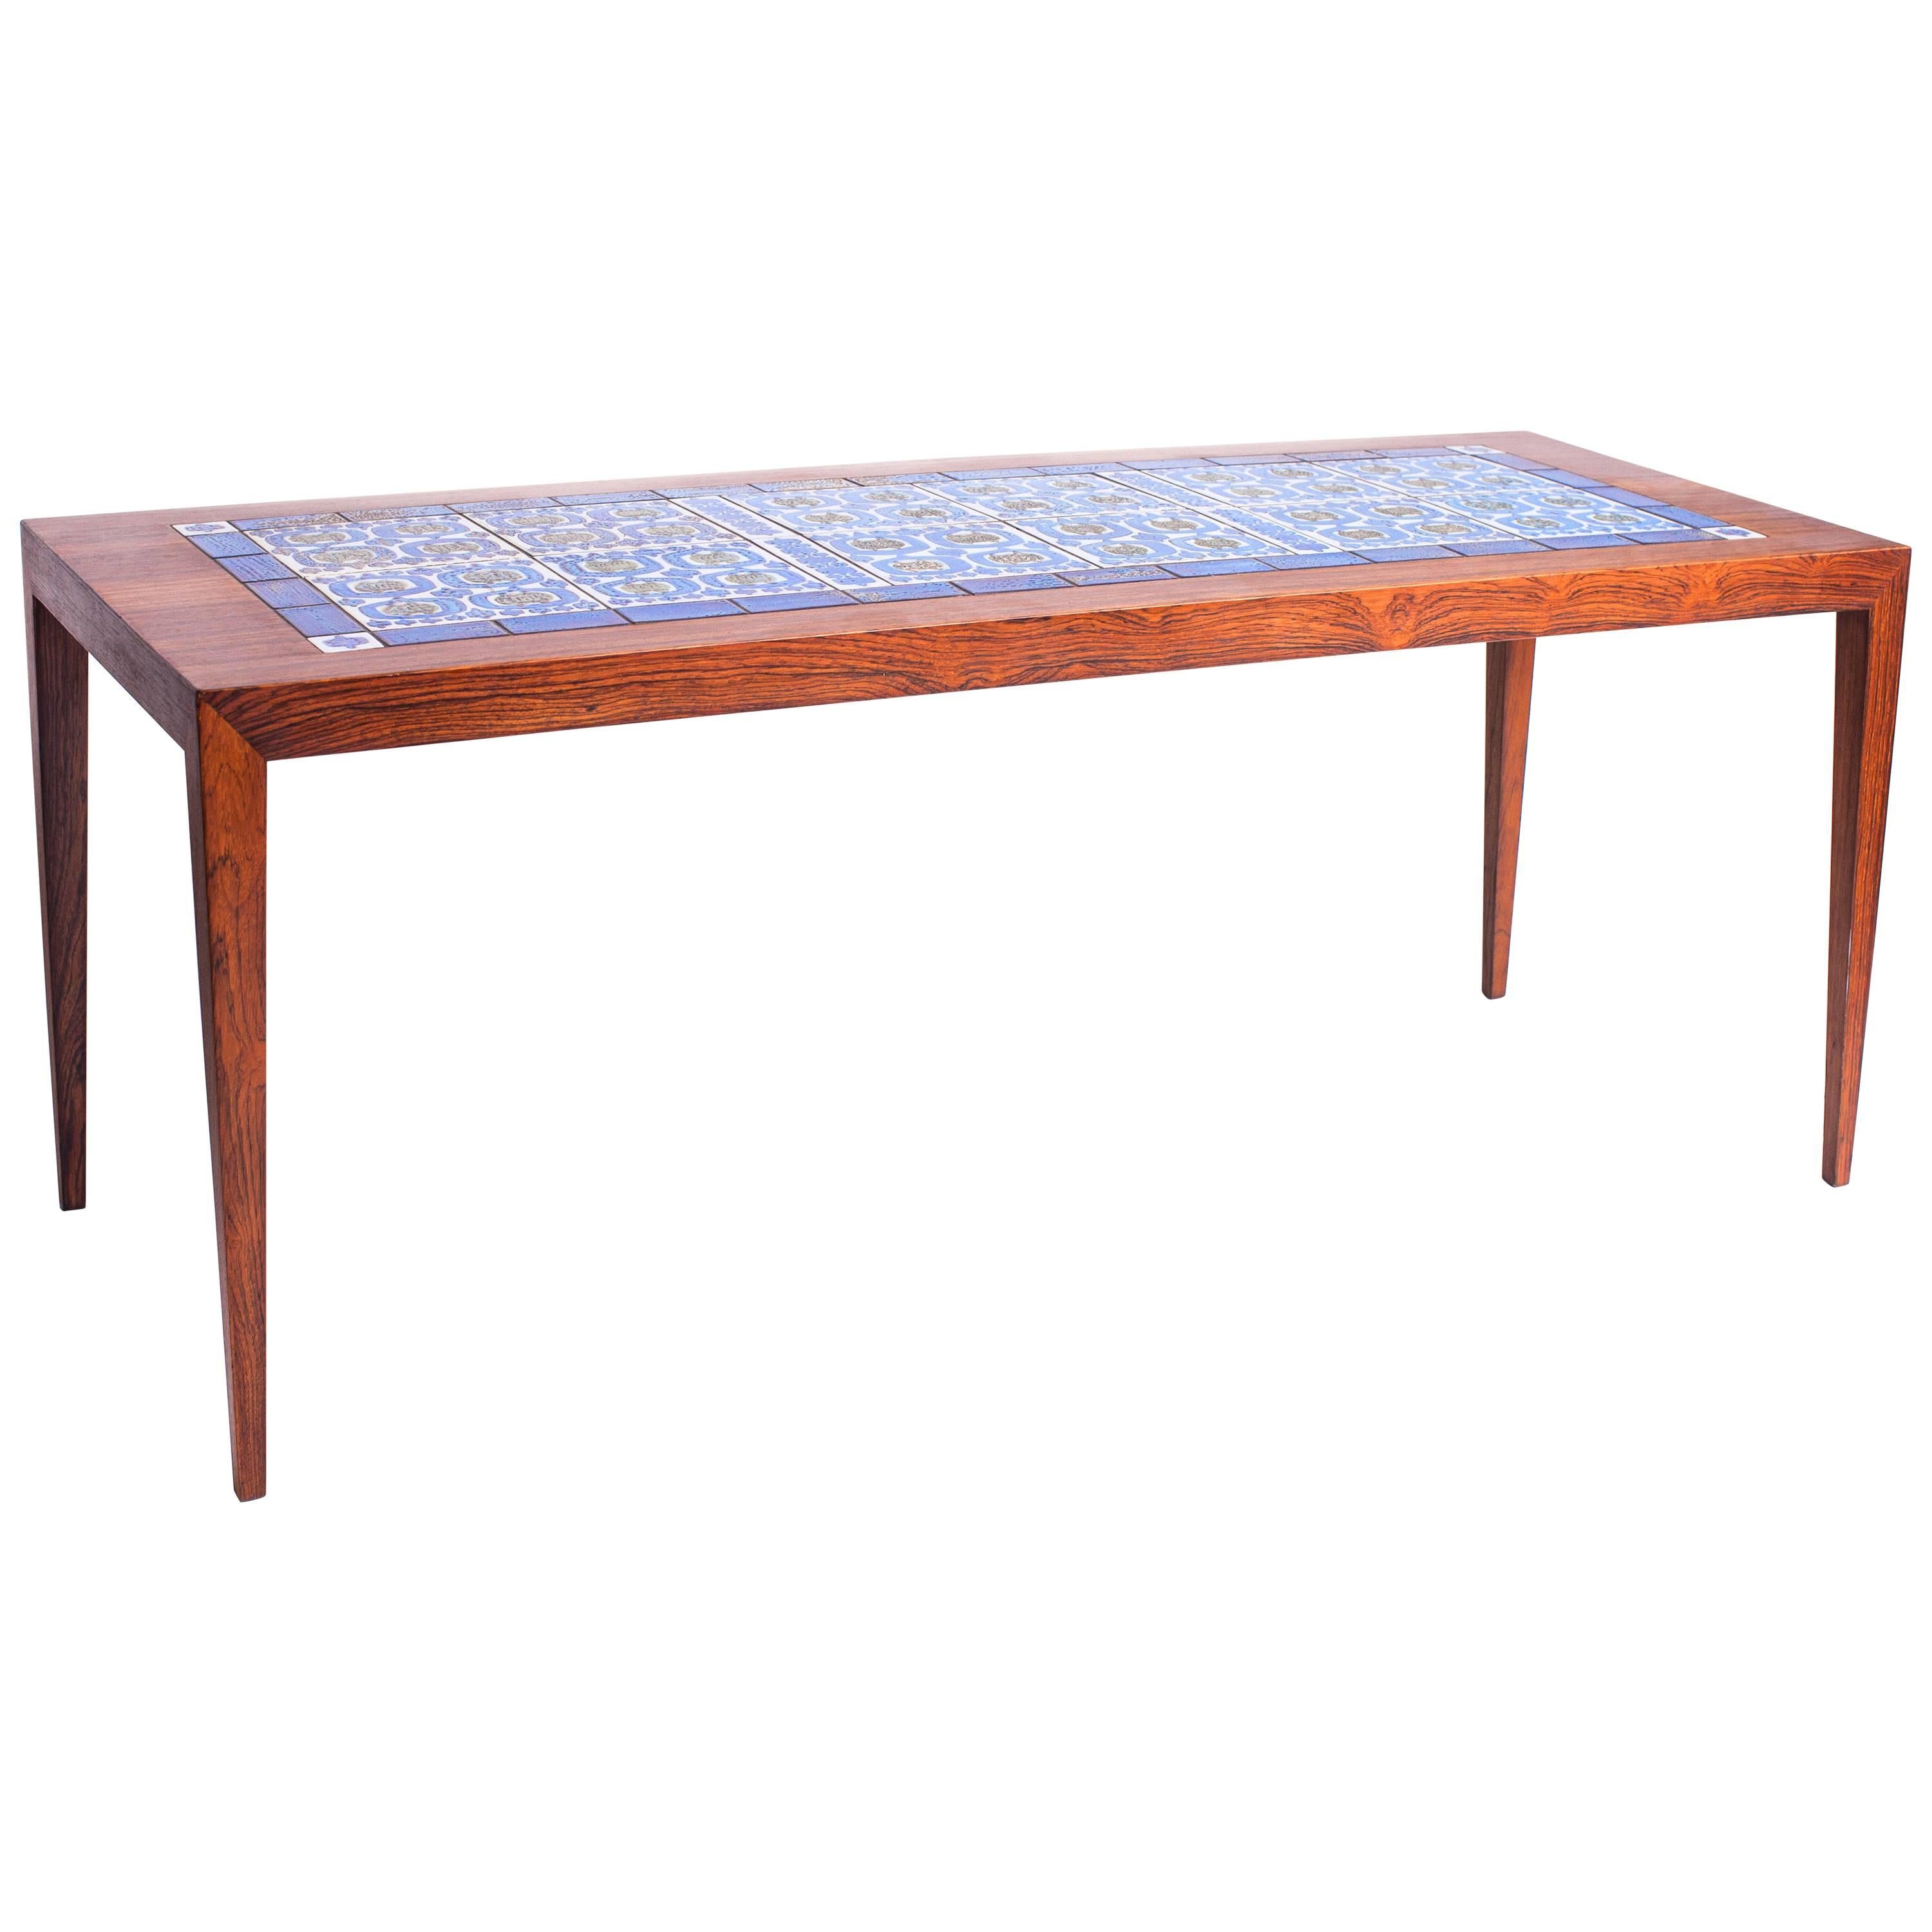 Rosewood Coffee Table with Blue and Green Ceramic Tiles by Severin Hansen